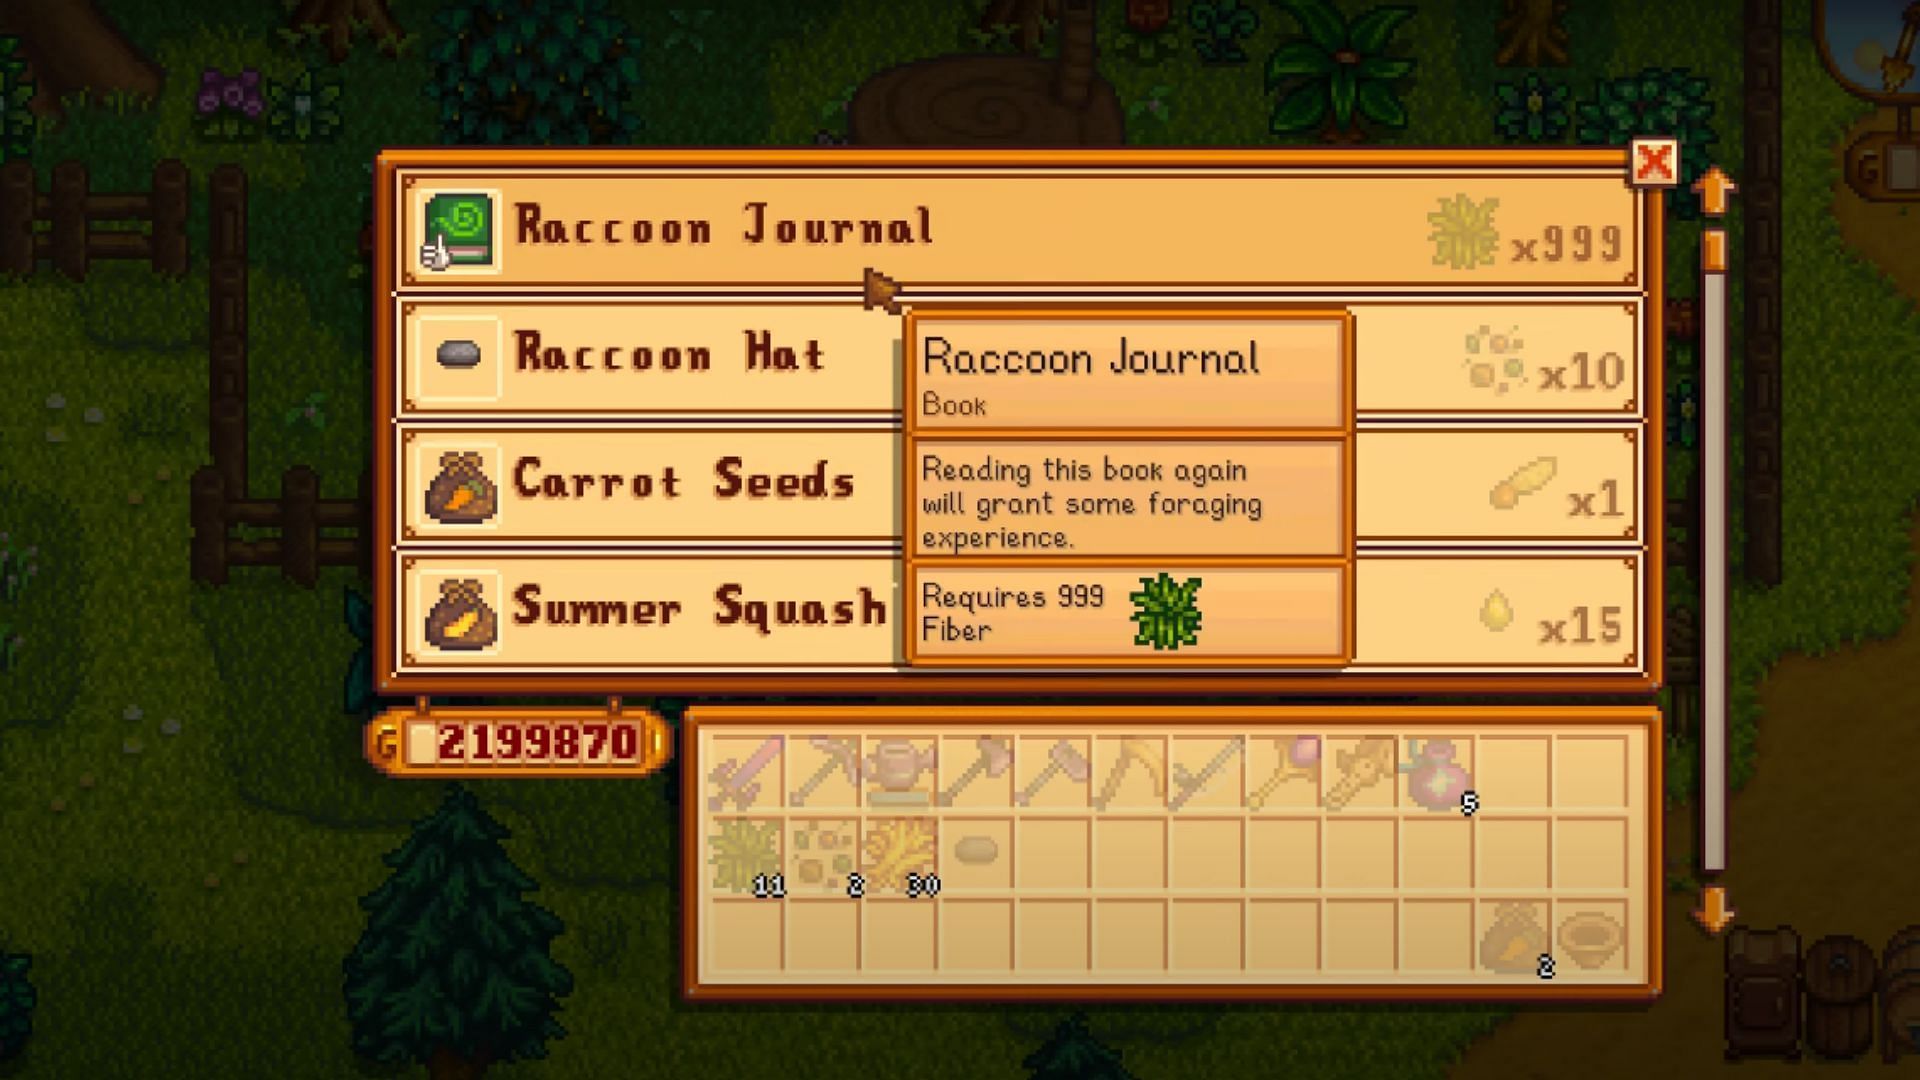 List of items available in the Raccoon Shop (Image via ConcernedApe || YouTube @Veilfyred)